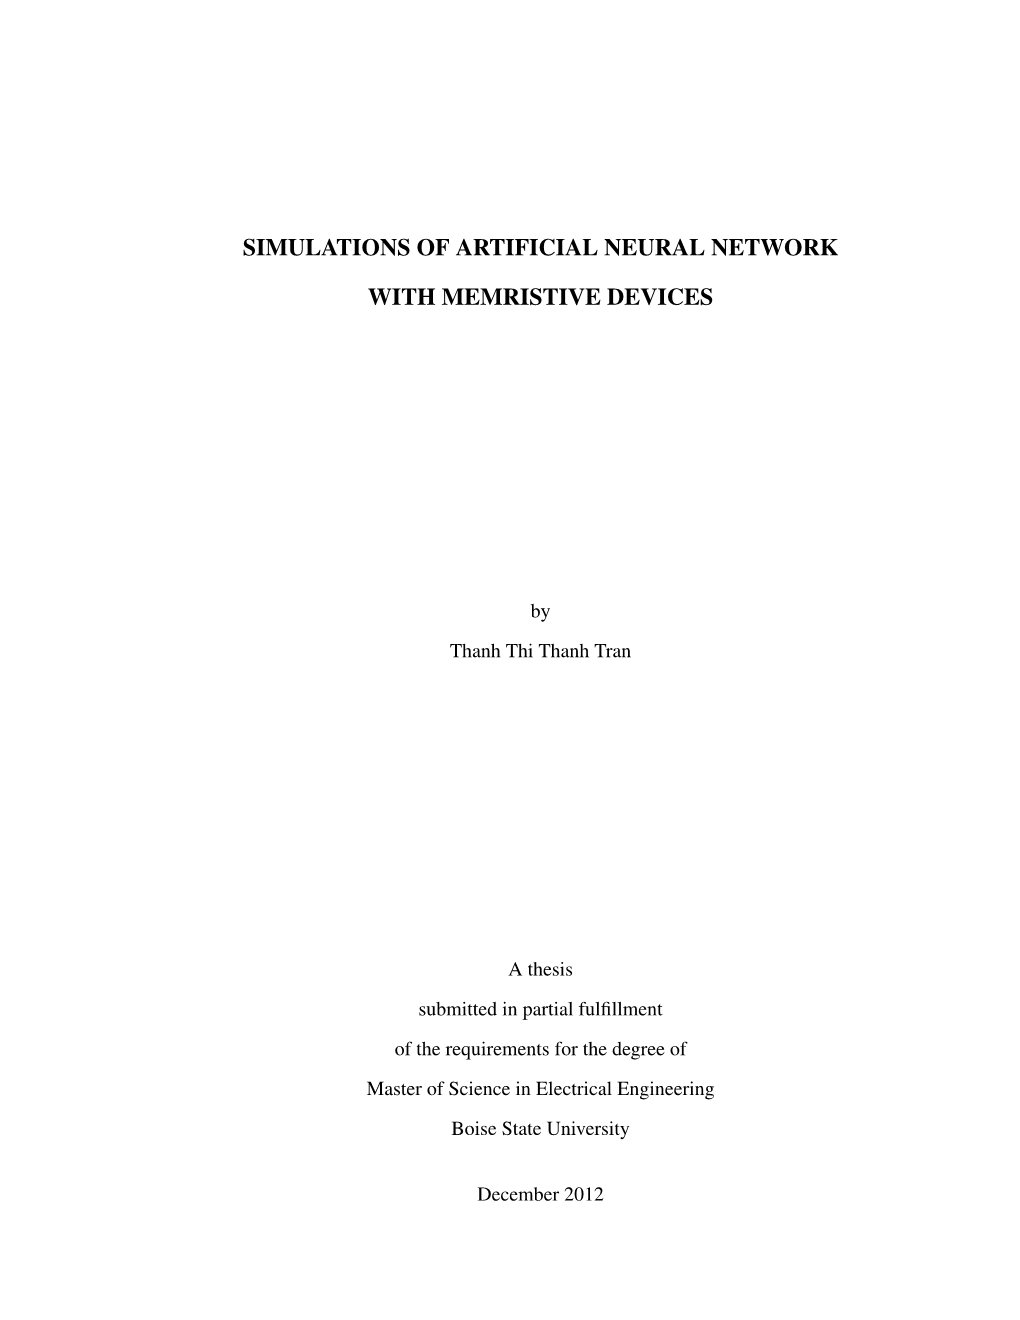 Simulations of Artificial Neural Network with Memristive Devices